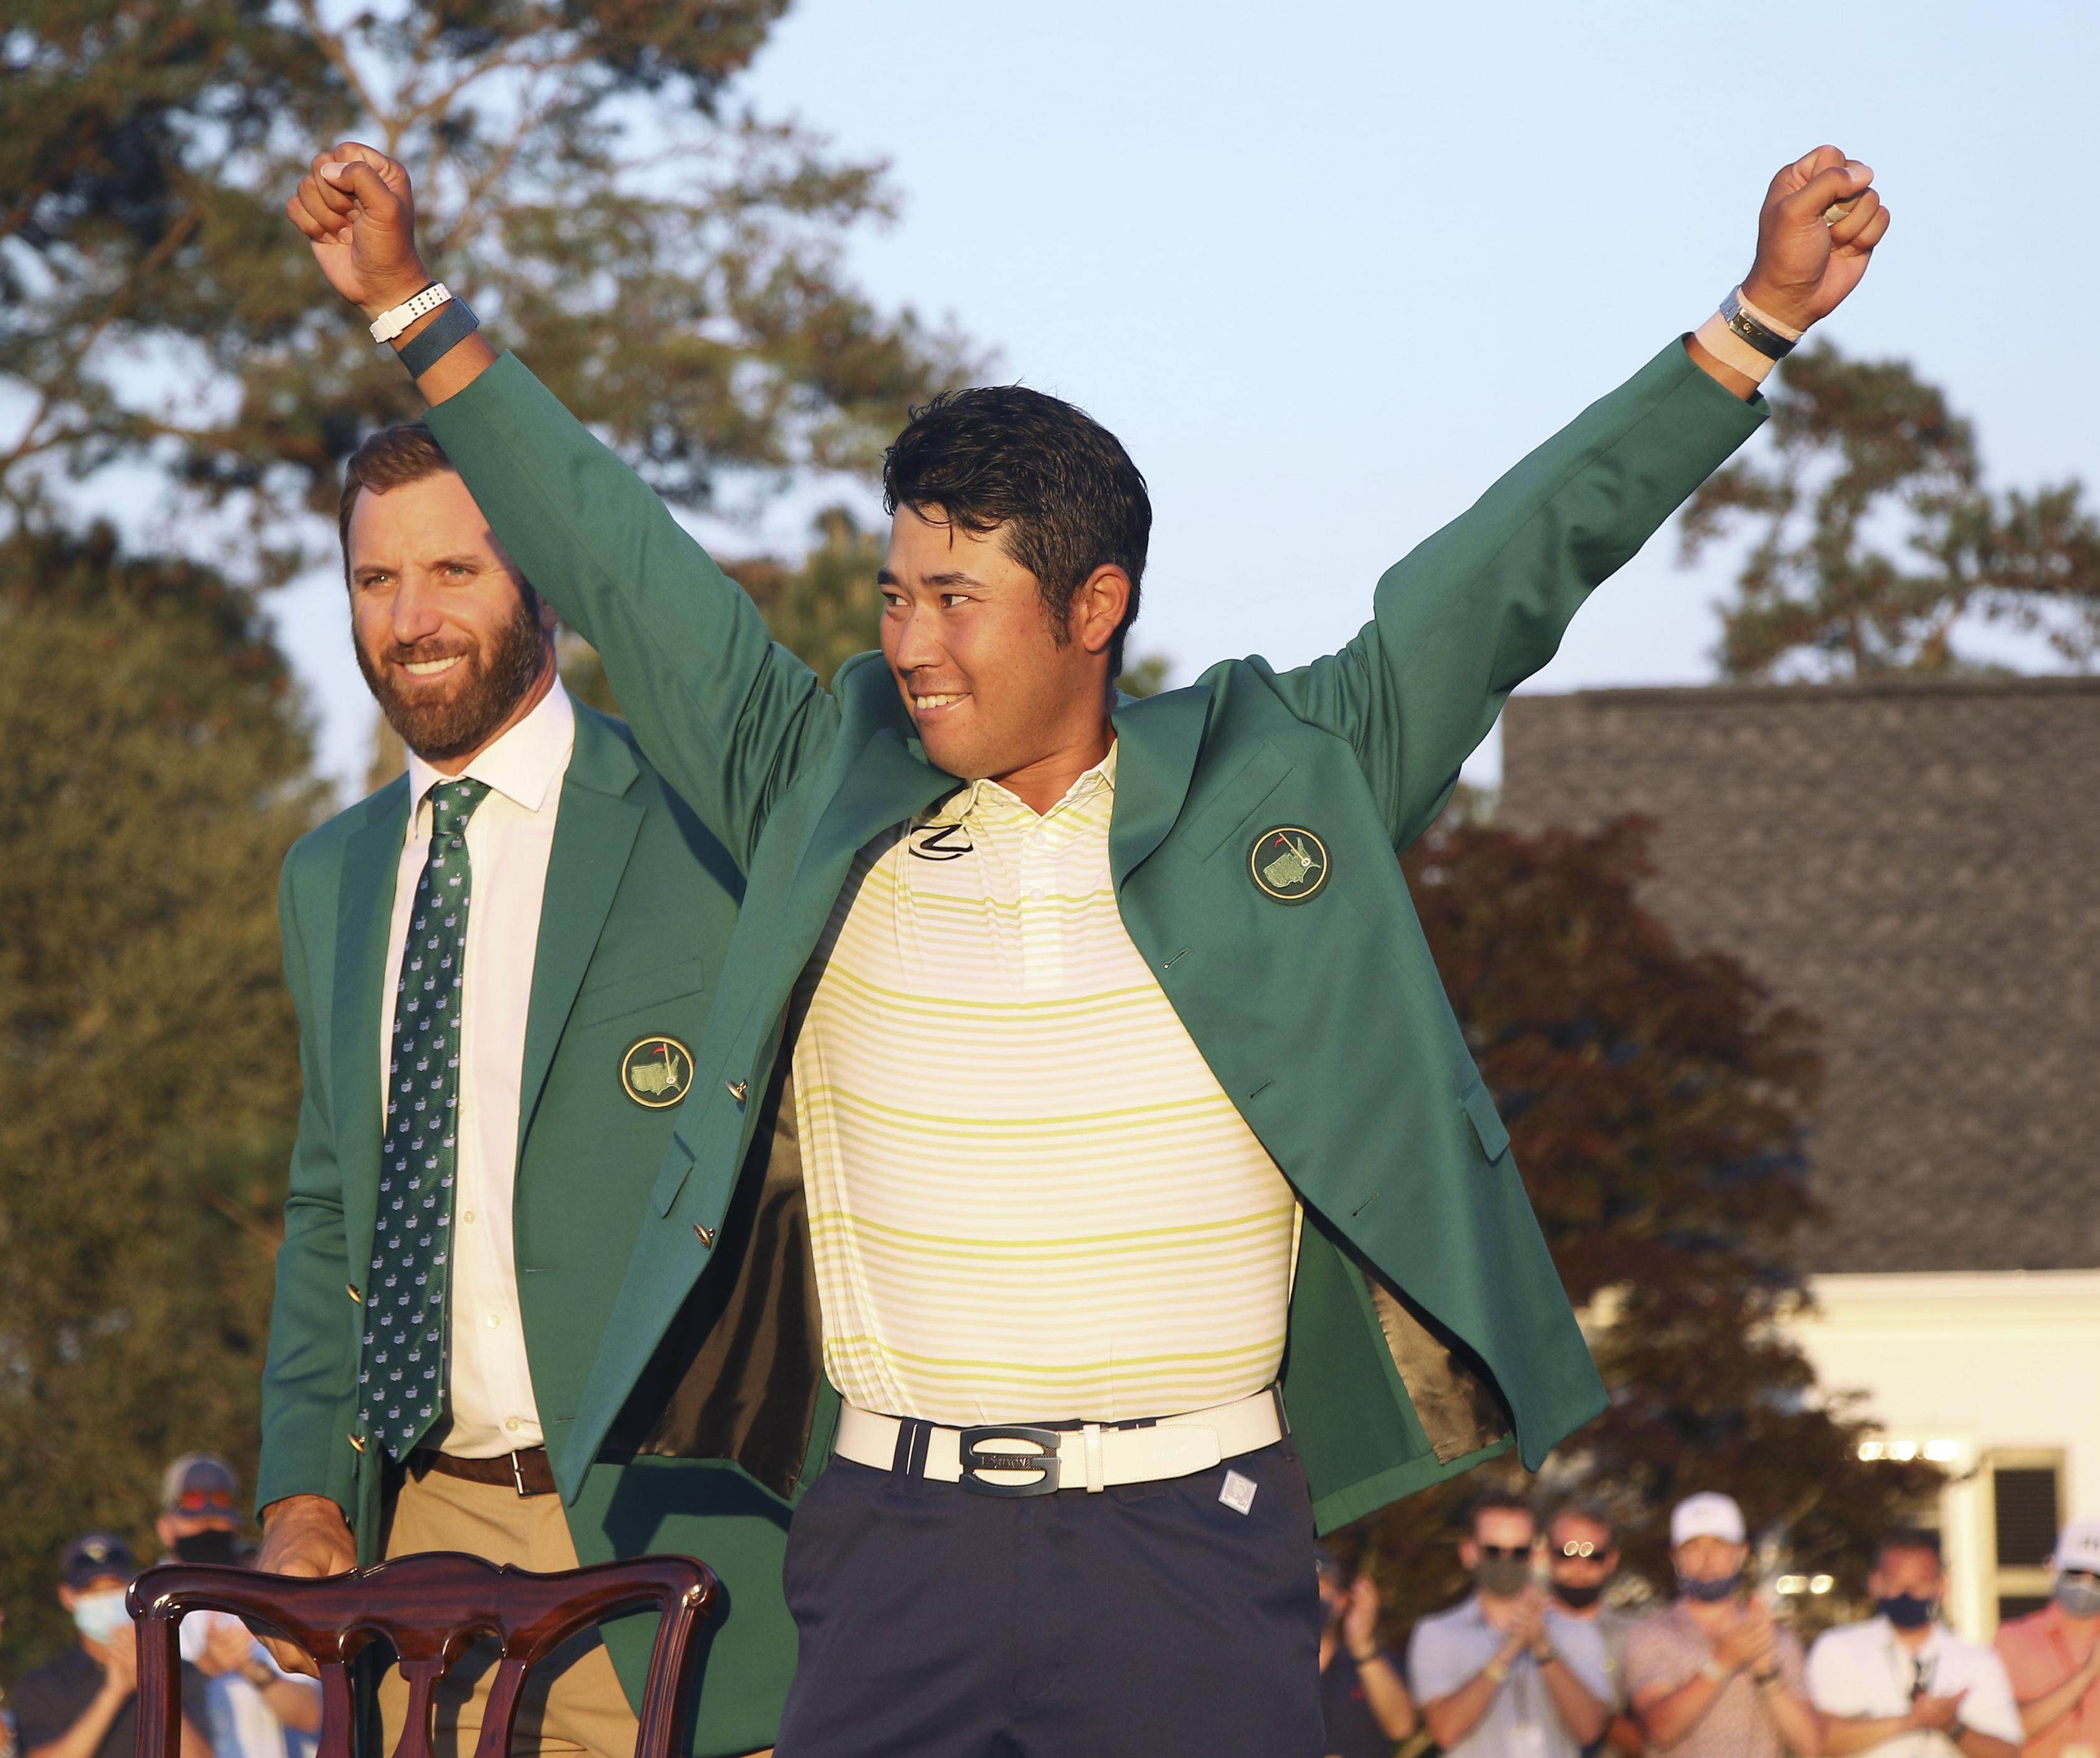 Japanese golfer Hideki Matsuyama celebrates after being presented with the green jacket after winning the Masters at Augusta. Photo: Kyodo